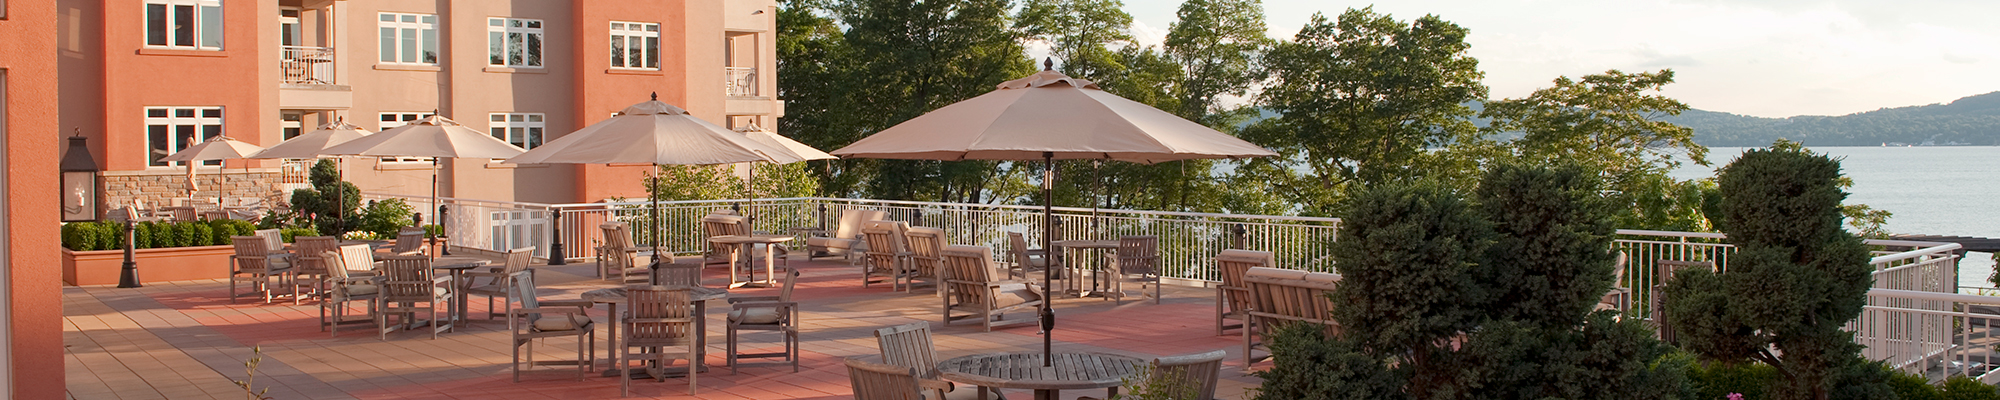 Outdoor terrace with chairs, tables and umbrellas